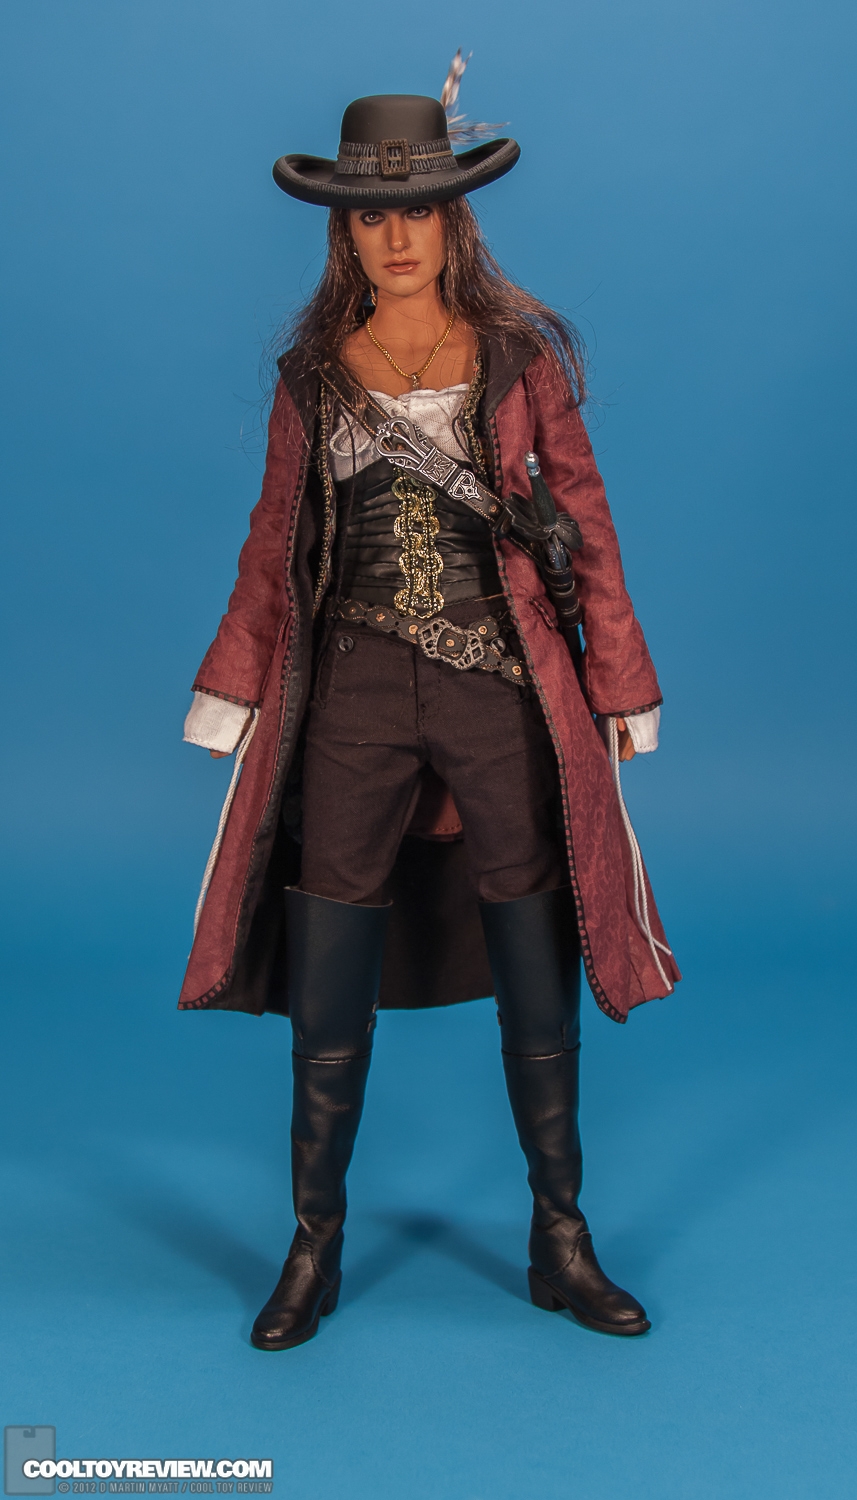 Angelica_Disney_Pirates_Of_The_Caribbean_Hot_Toys-13.jpg